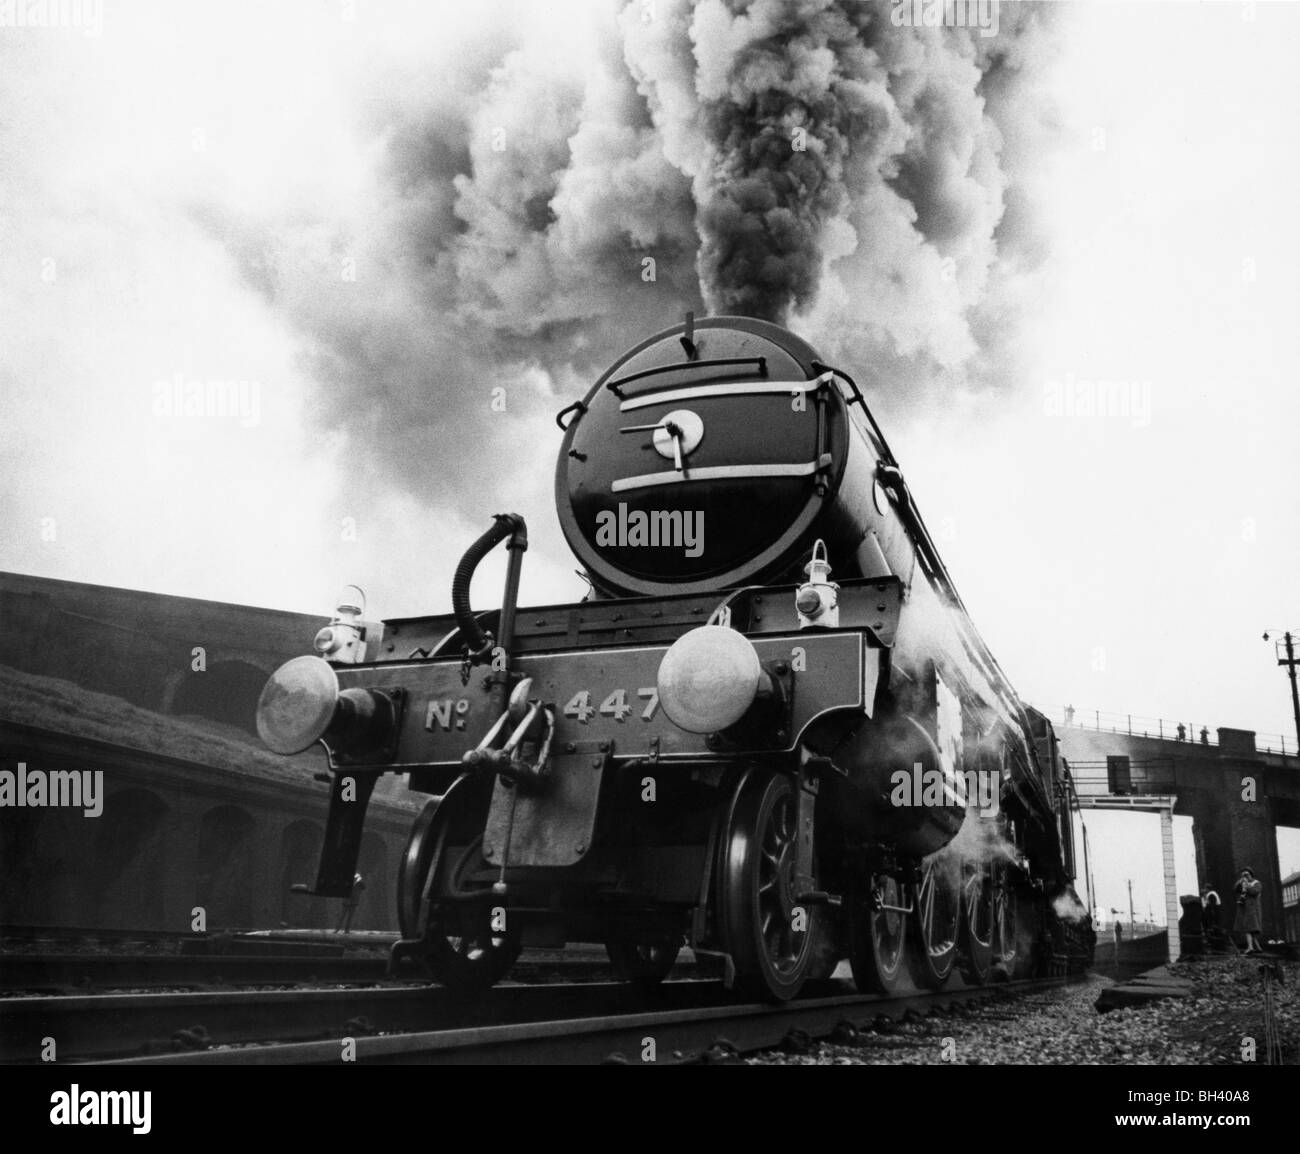 The Flying Scotsman, built 1923, steamed up and leaving Kings Cross London for Scotland on 1 MAY 1968 with the 40th anniversary non stop run of the 'Flying Scotsman' train to Edinburgh Waverley. (Flying Scotsman 1968 BW A) Stock Photo